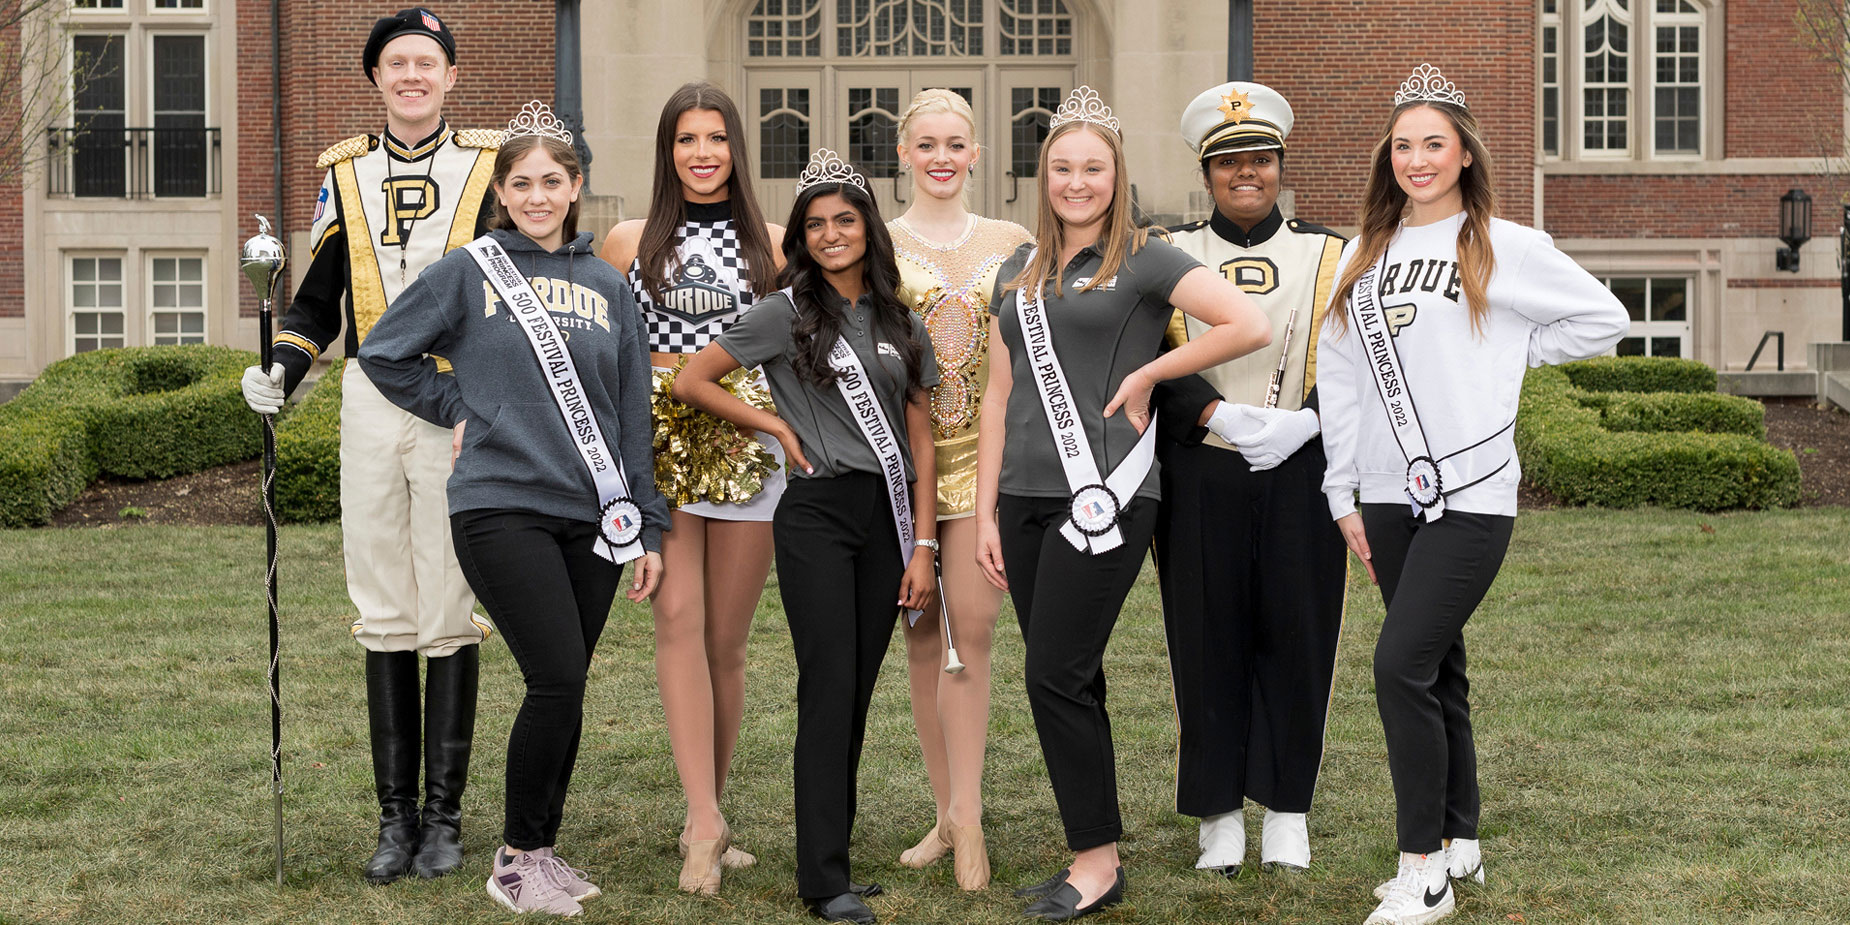 Members of the Purdue “All-American” Marching Band and four of the 500 Festival Princesses representing the University at the Indianapolis 500 stand in front of the Purdue Memorial Union.